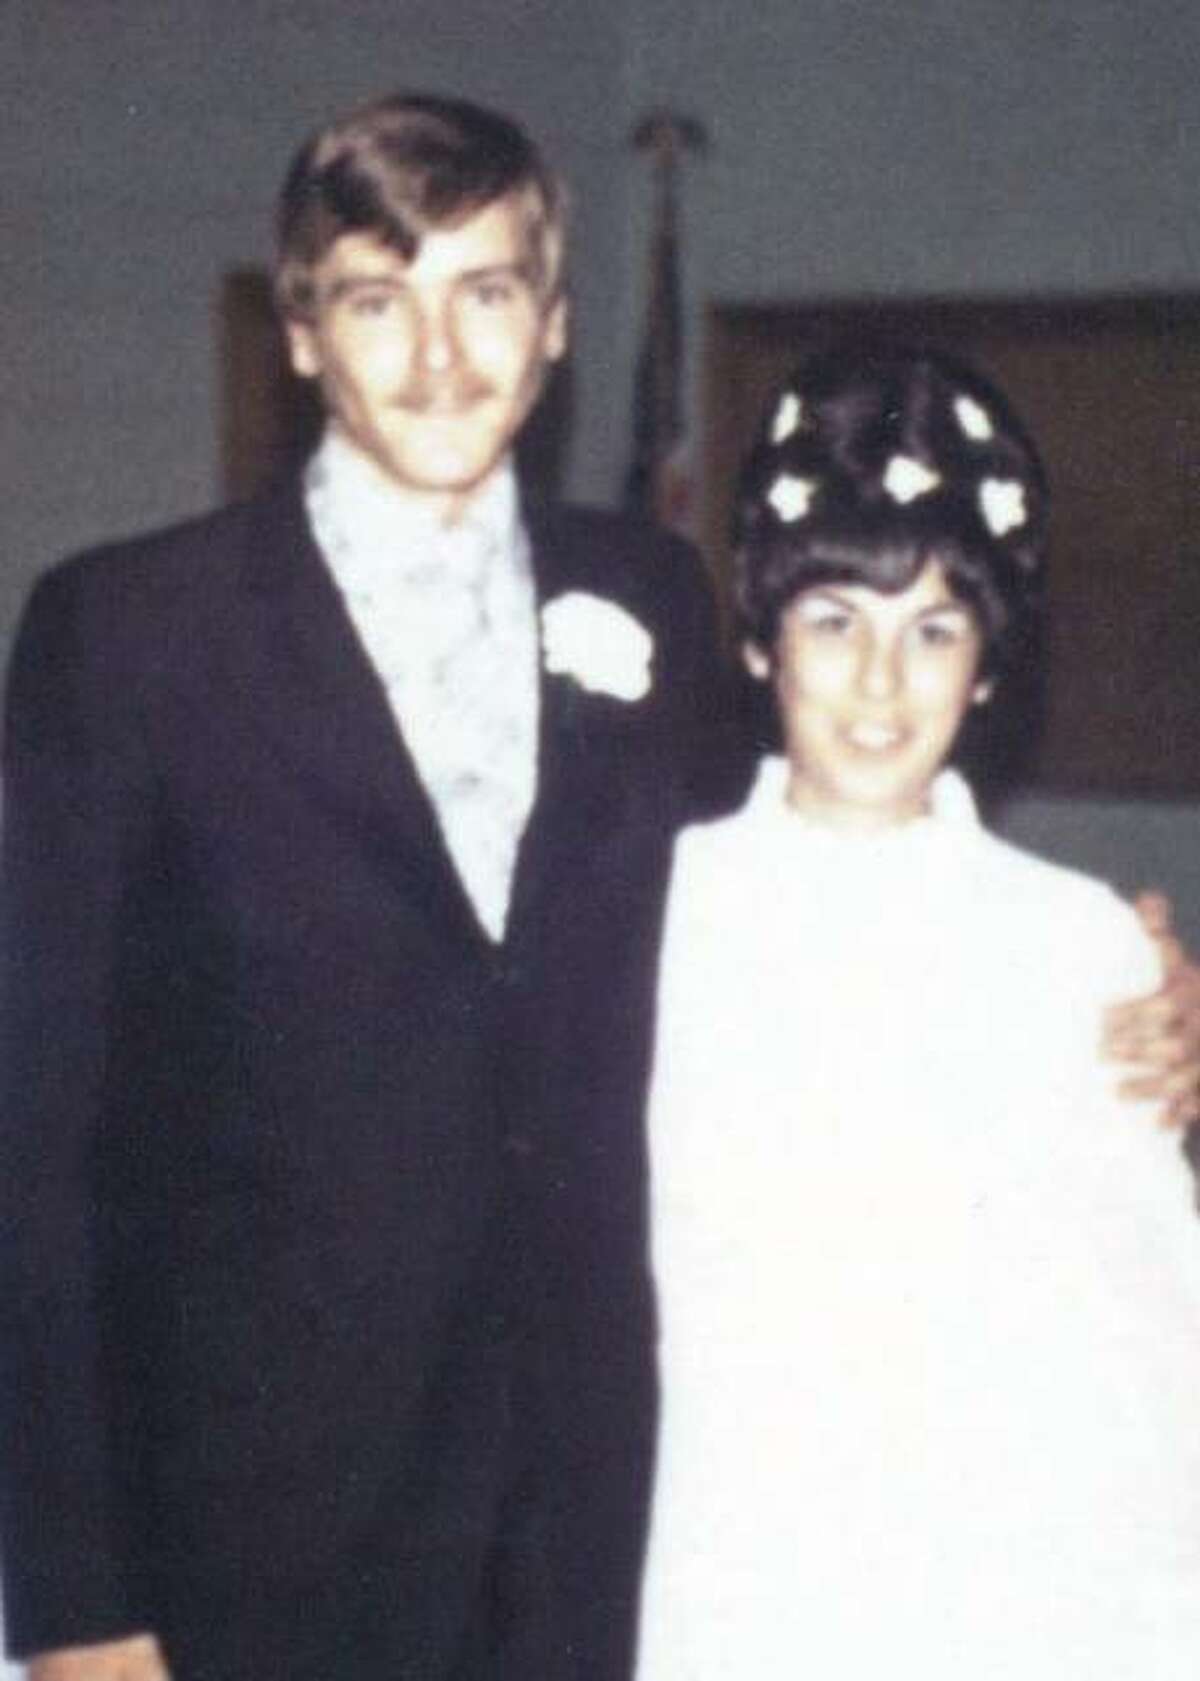 Dave and Mary Eckhouse at their wedding